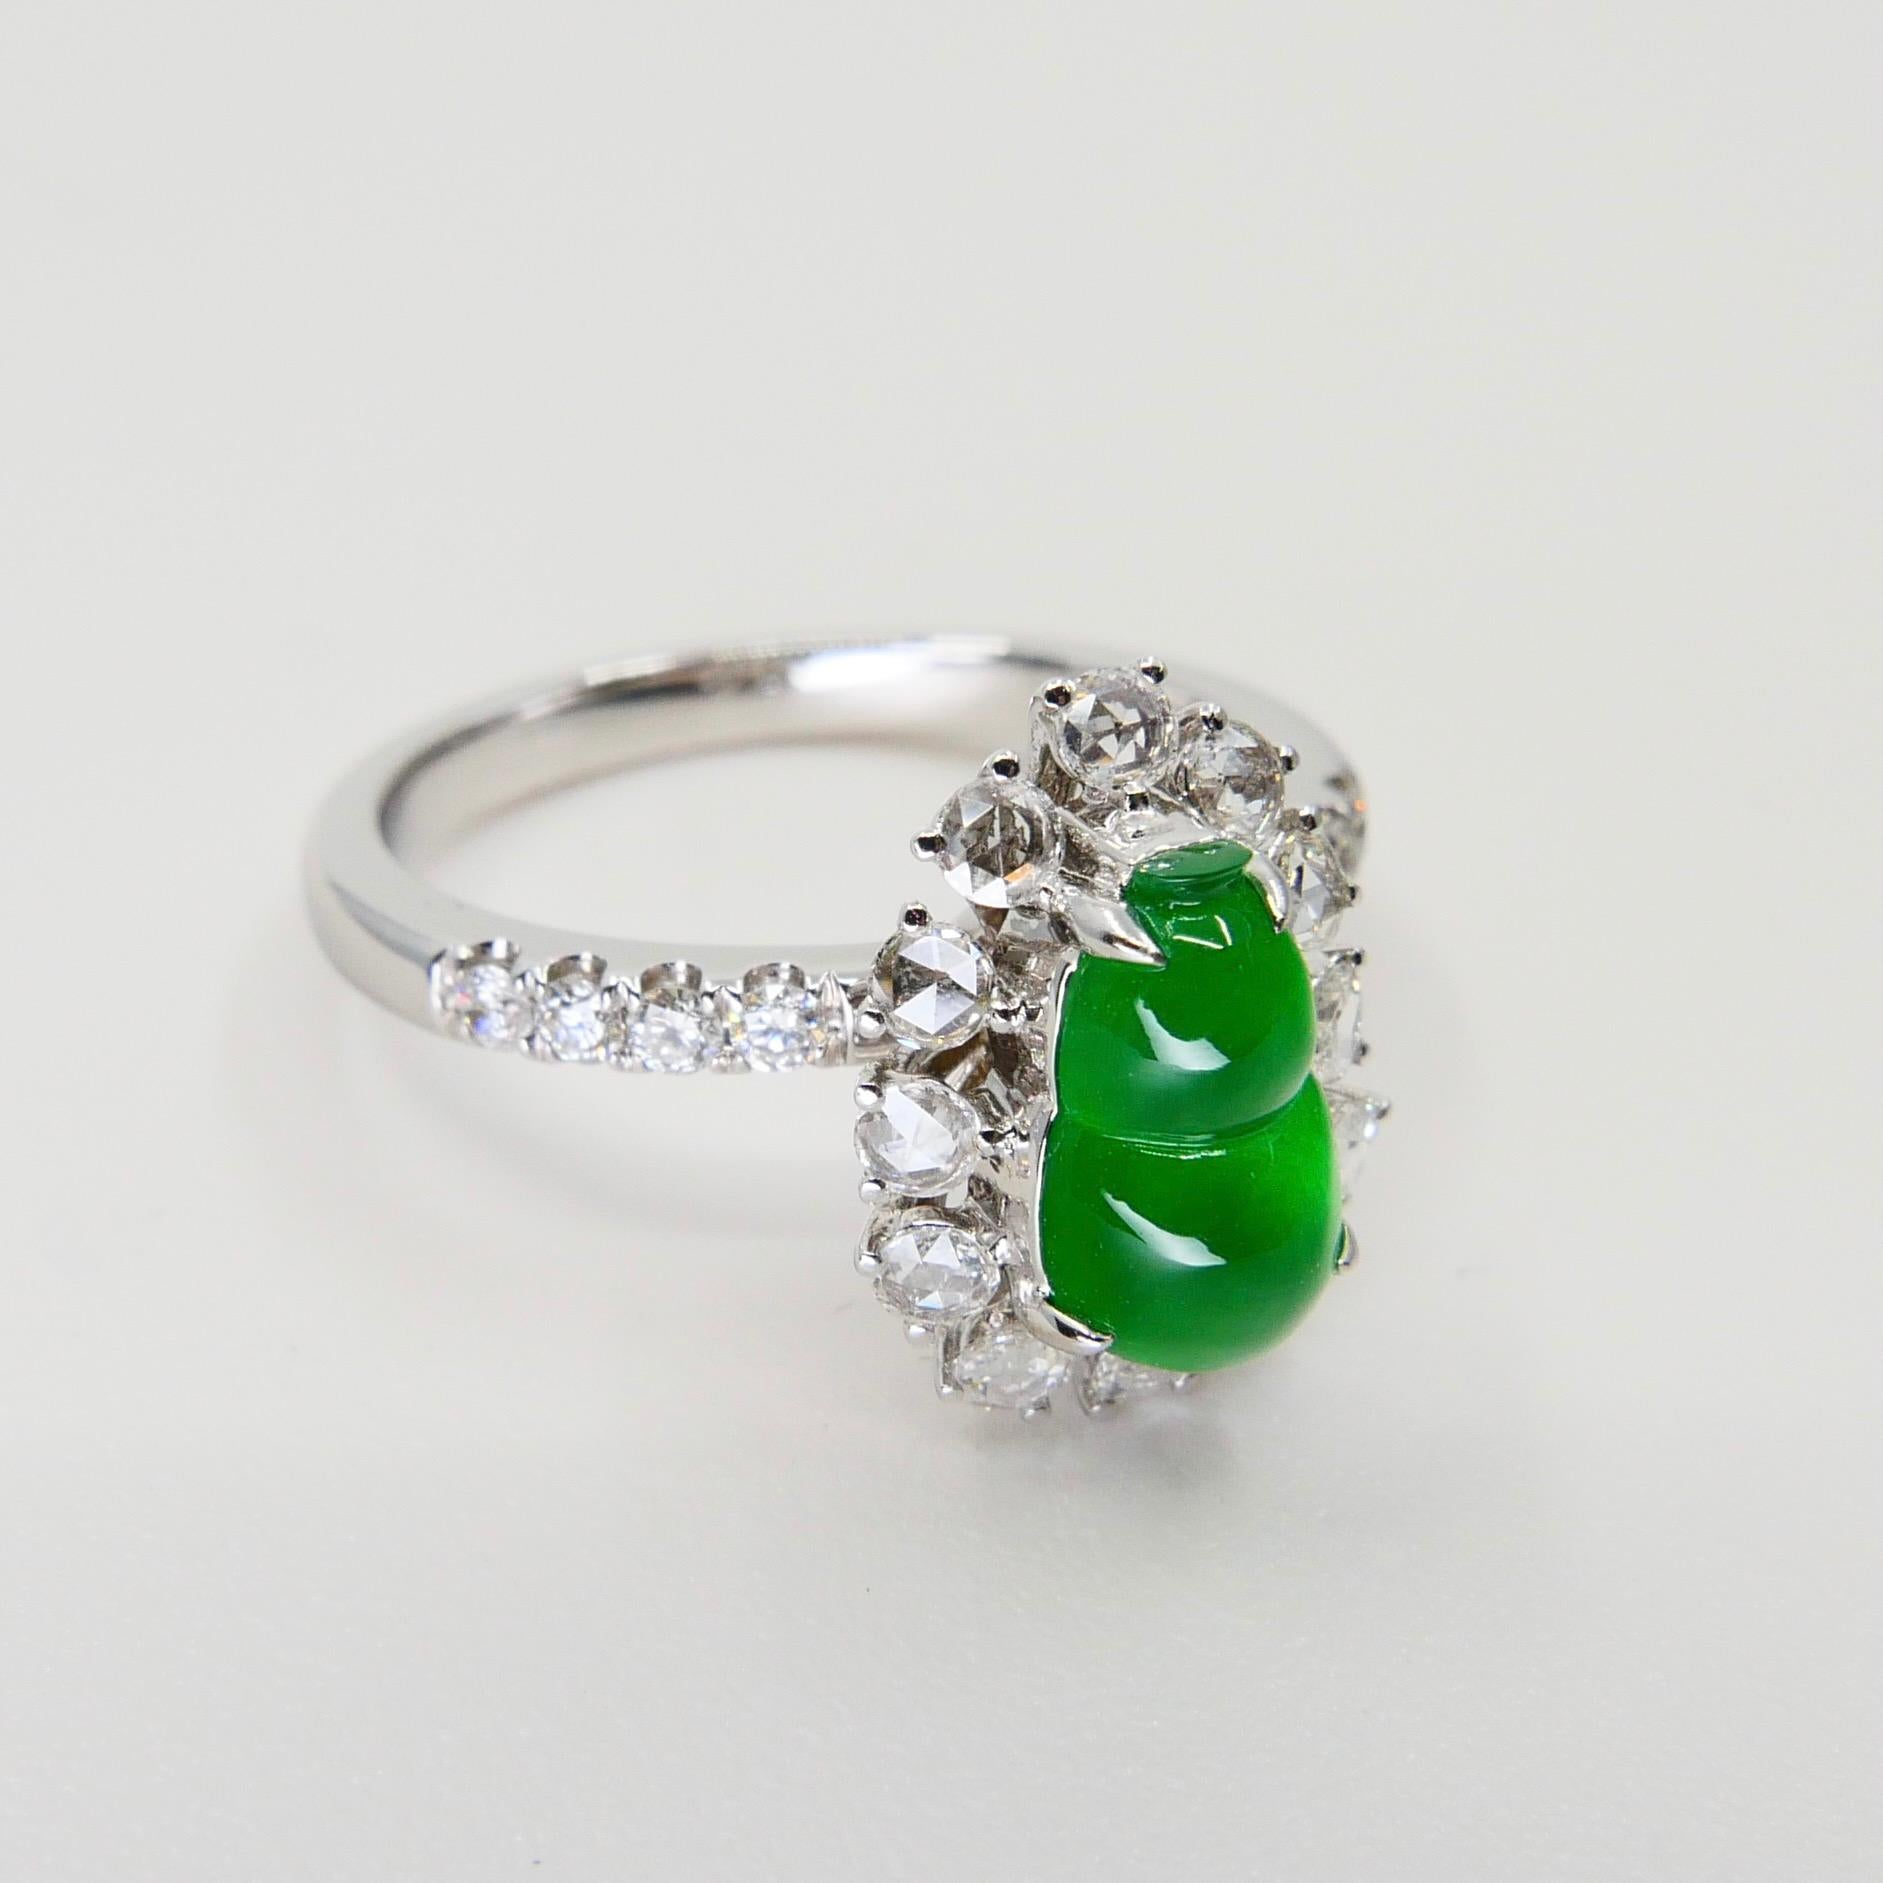 Certified Natural Imperial Jade Gourd & Diamond Cocktail Ring, Super Glow 7